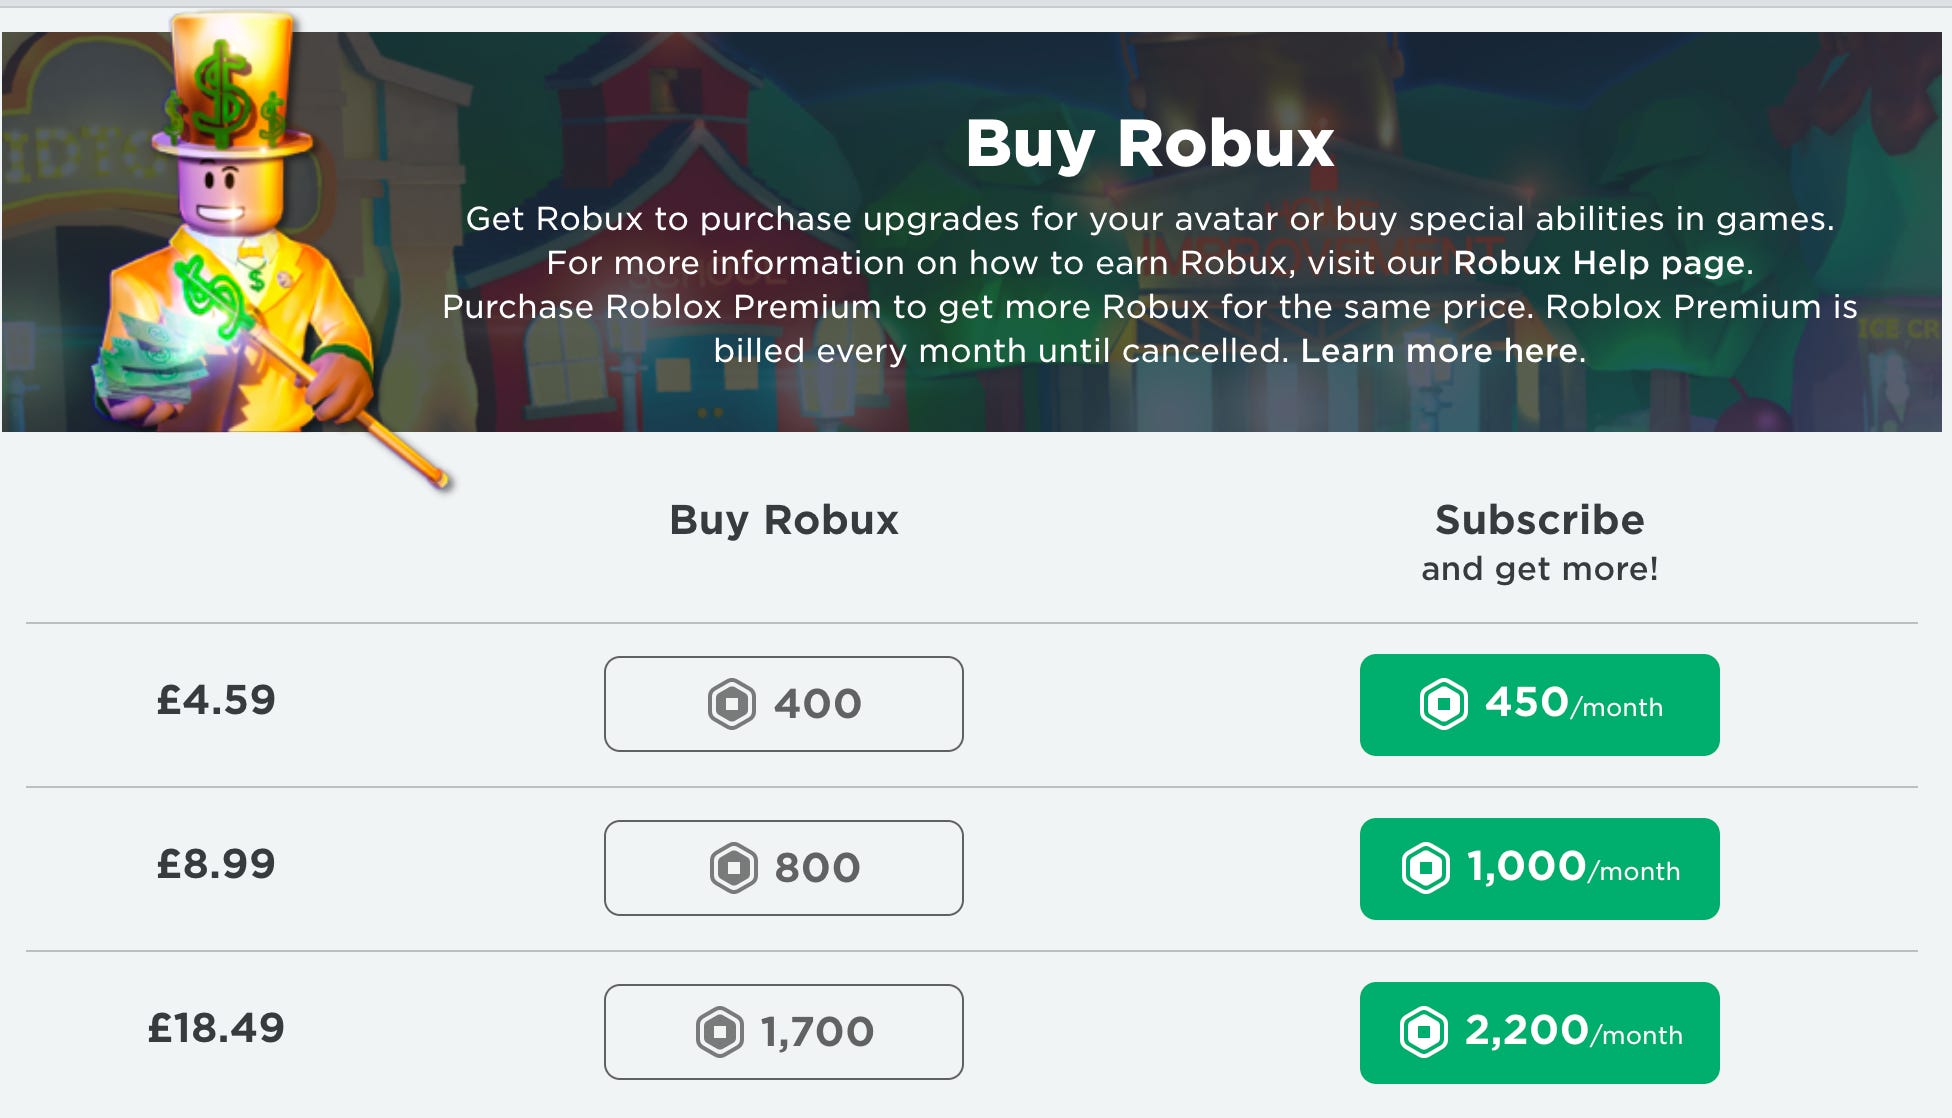 No 80 Roblox Review - buy robux exchange